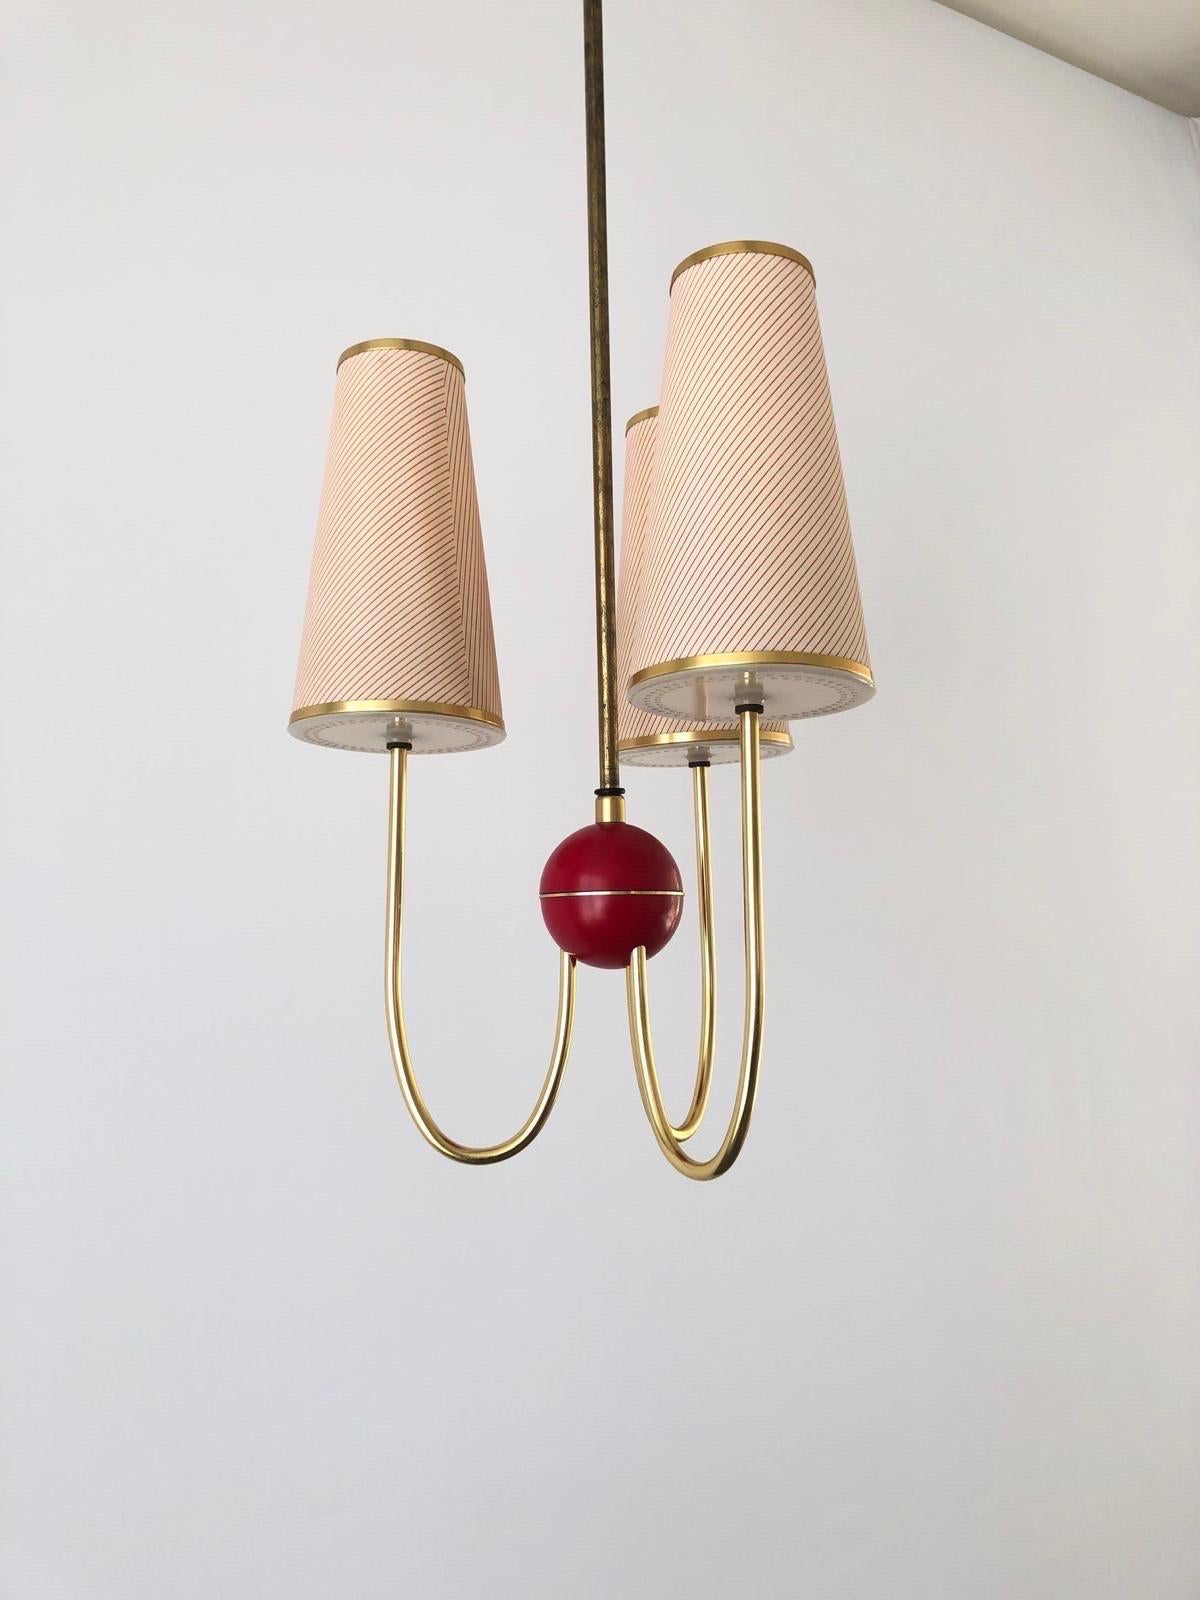 3-armed Fabric and Plastic Sputnik Pendant Lamp by Erco, 1950s, Germany For Sale 3